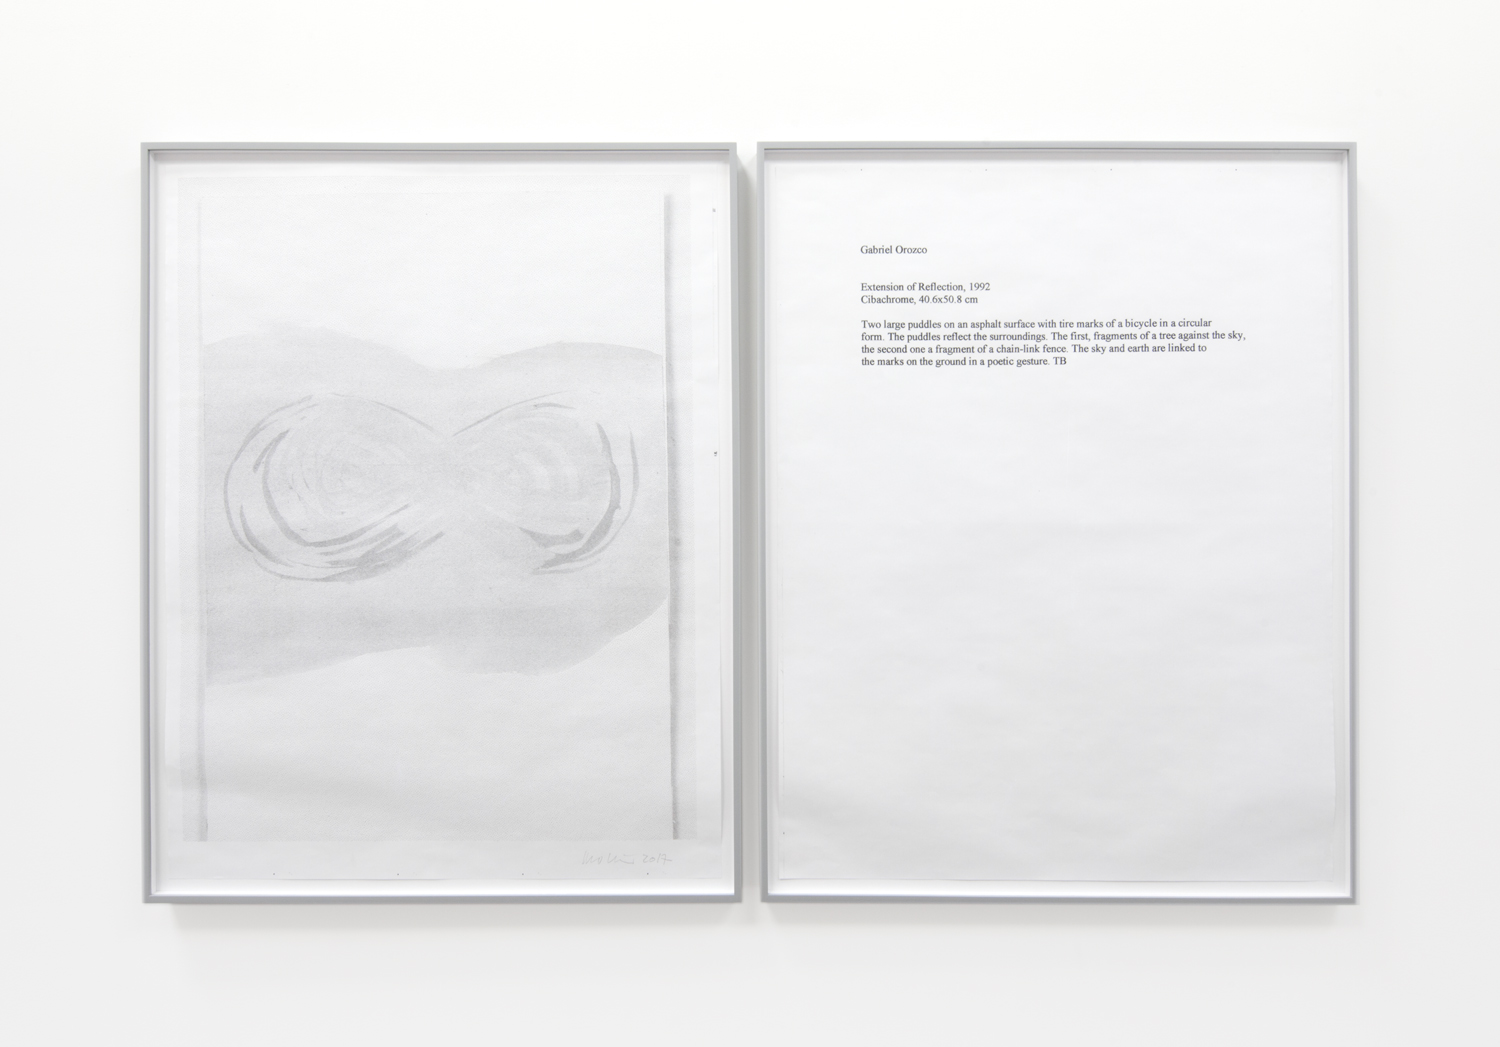   One Work with Footnote (Gabriel Orozco) &nbsp;&nbsp;2015-2017 diptych; hybrid prints edition 1 of 1 36 x 29 inches each 